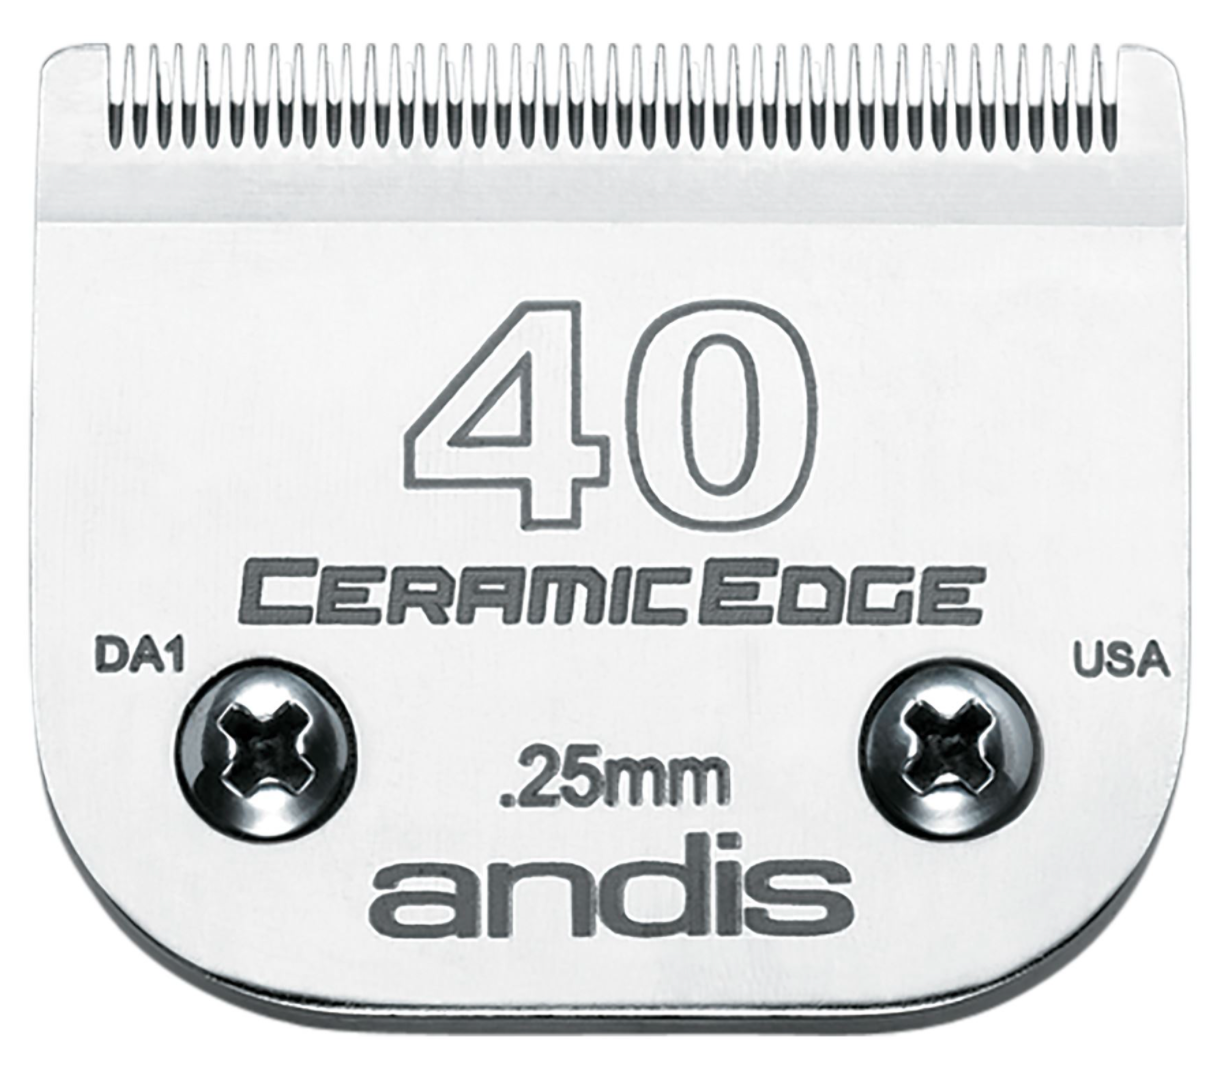 A-5 #40 Surgical Blade